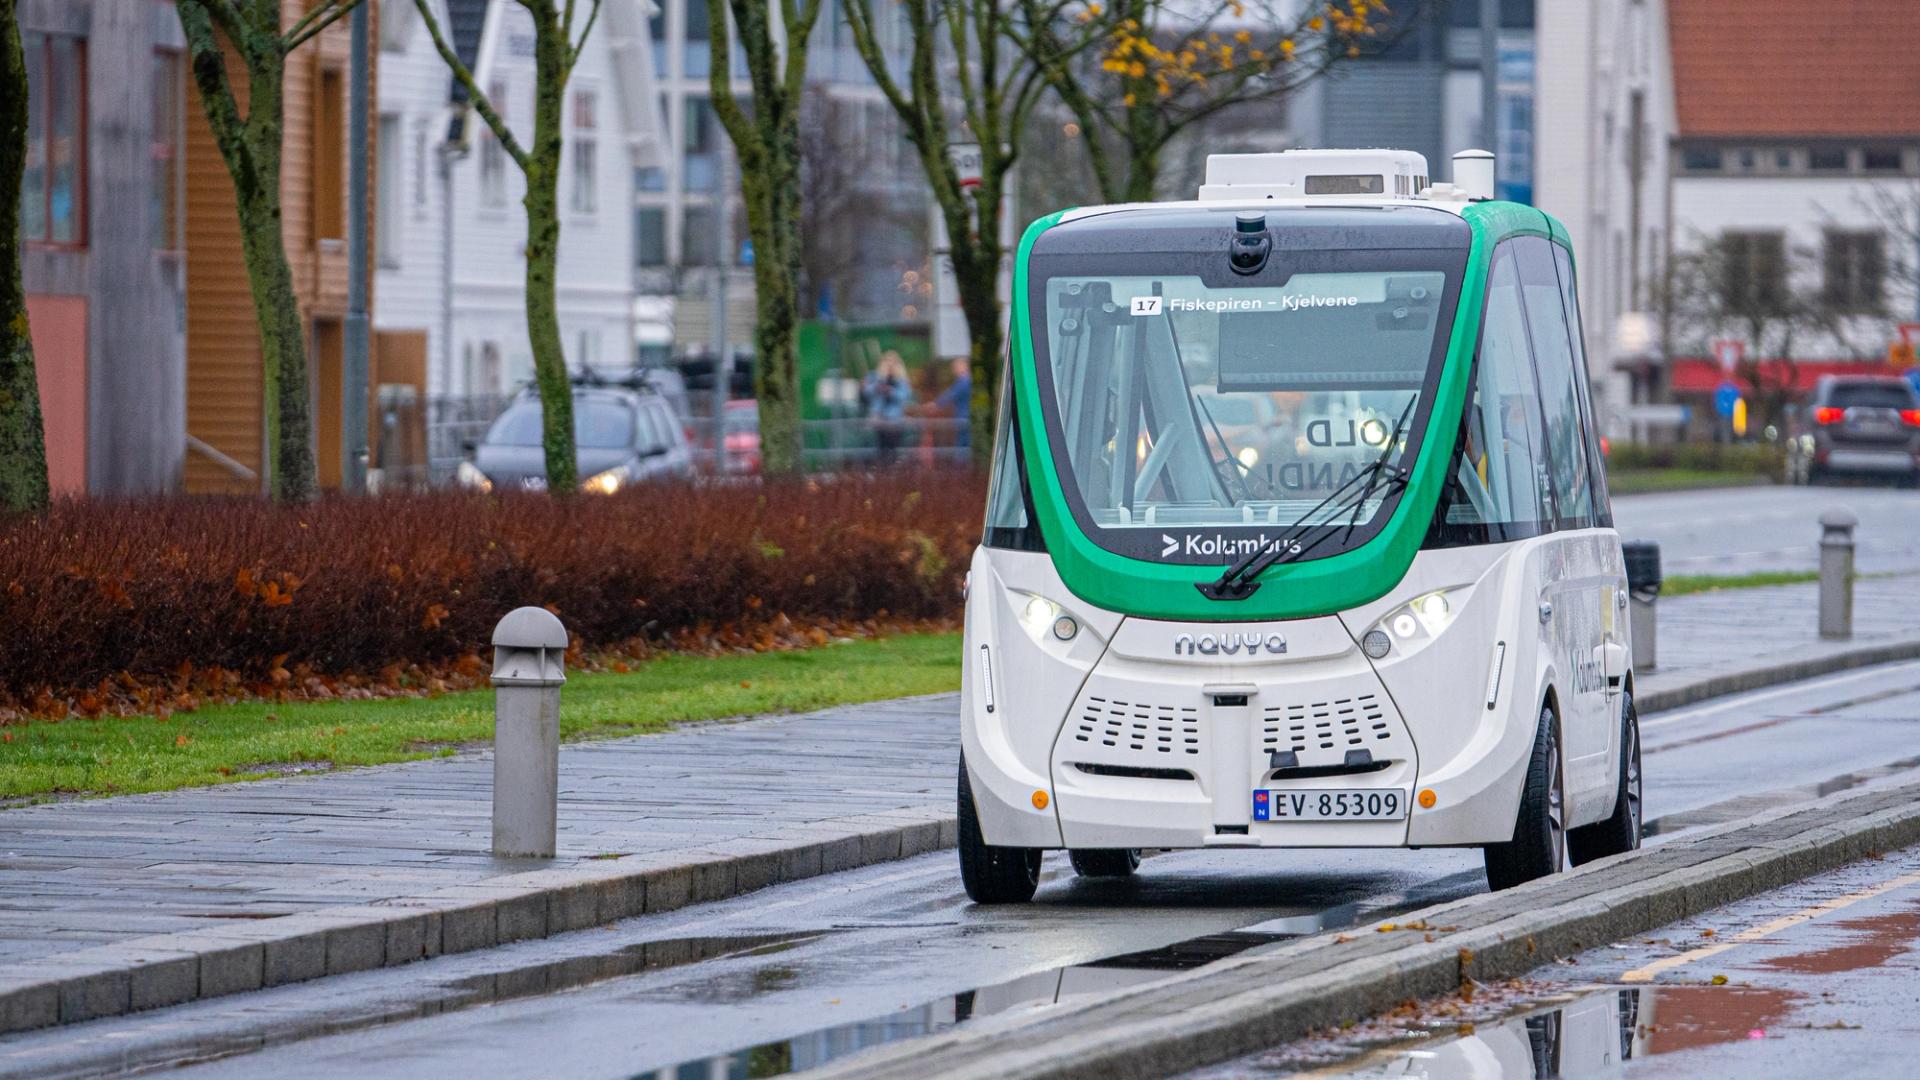 A photo of an autonomous self-driving bus on the road in Stavanger